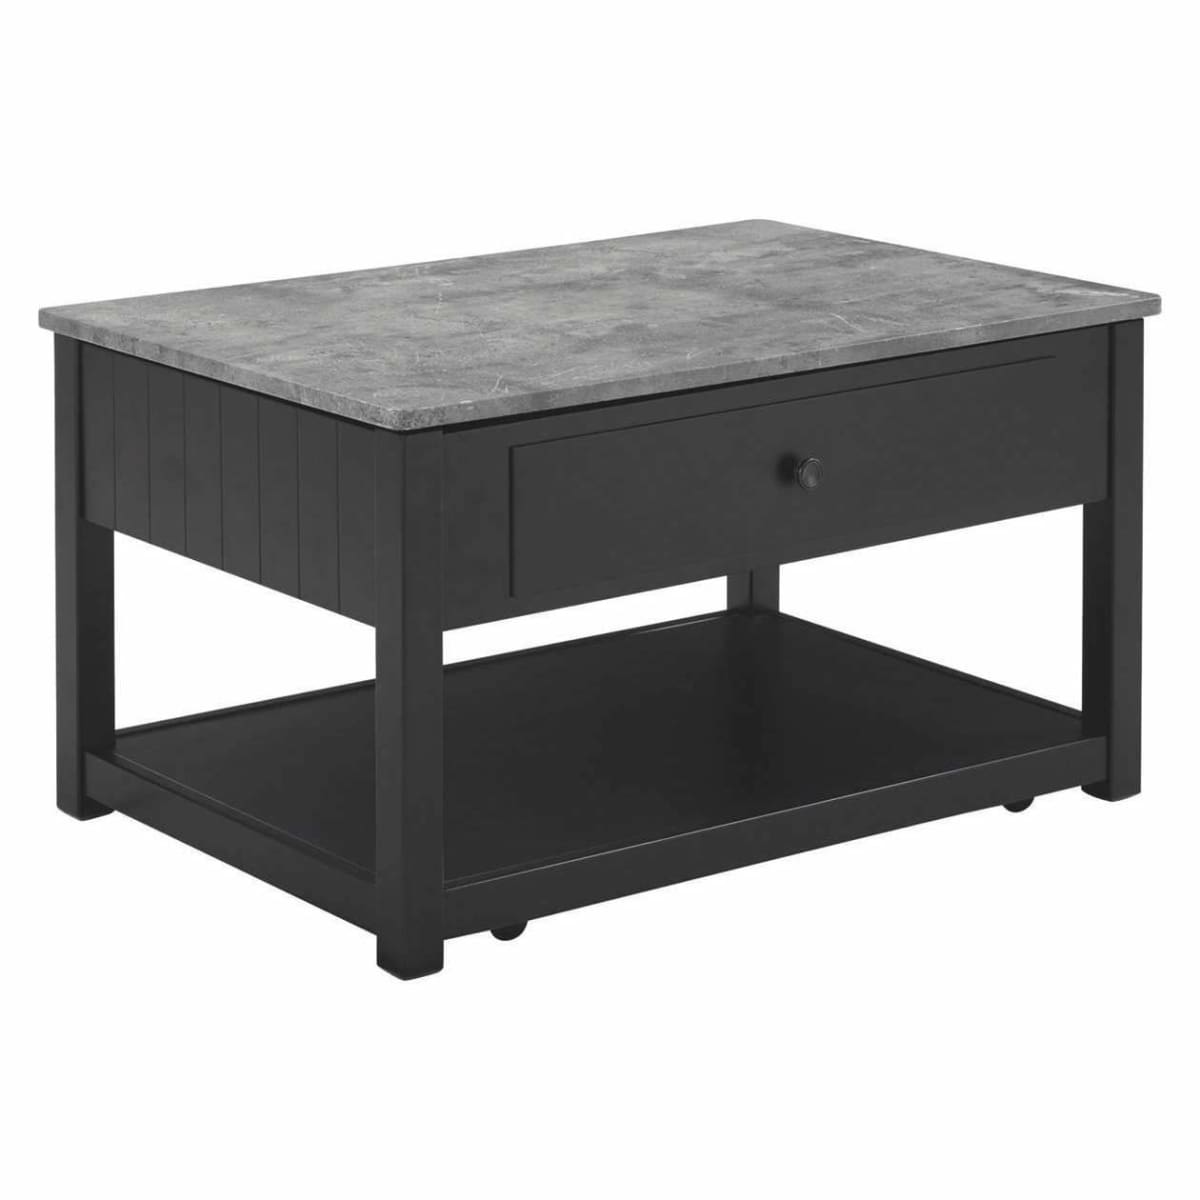 Ezmonei Coffee Table with Lift Top - COFFEE TABLE